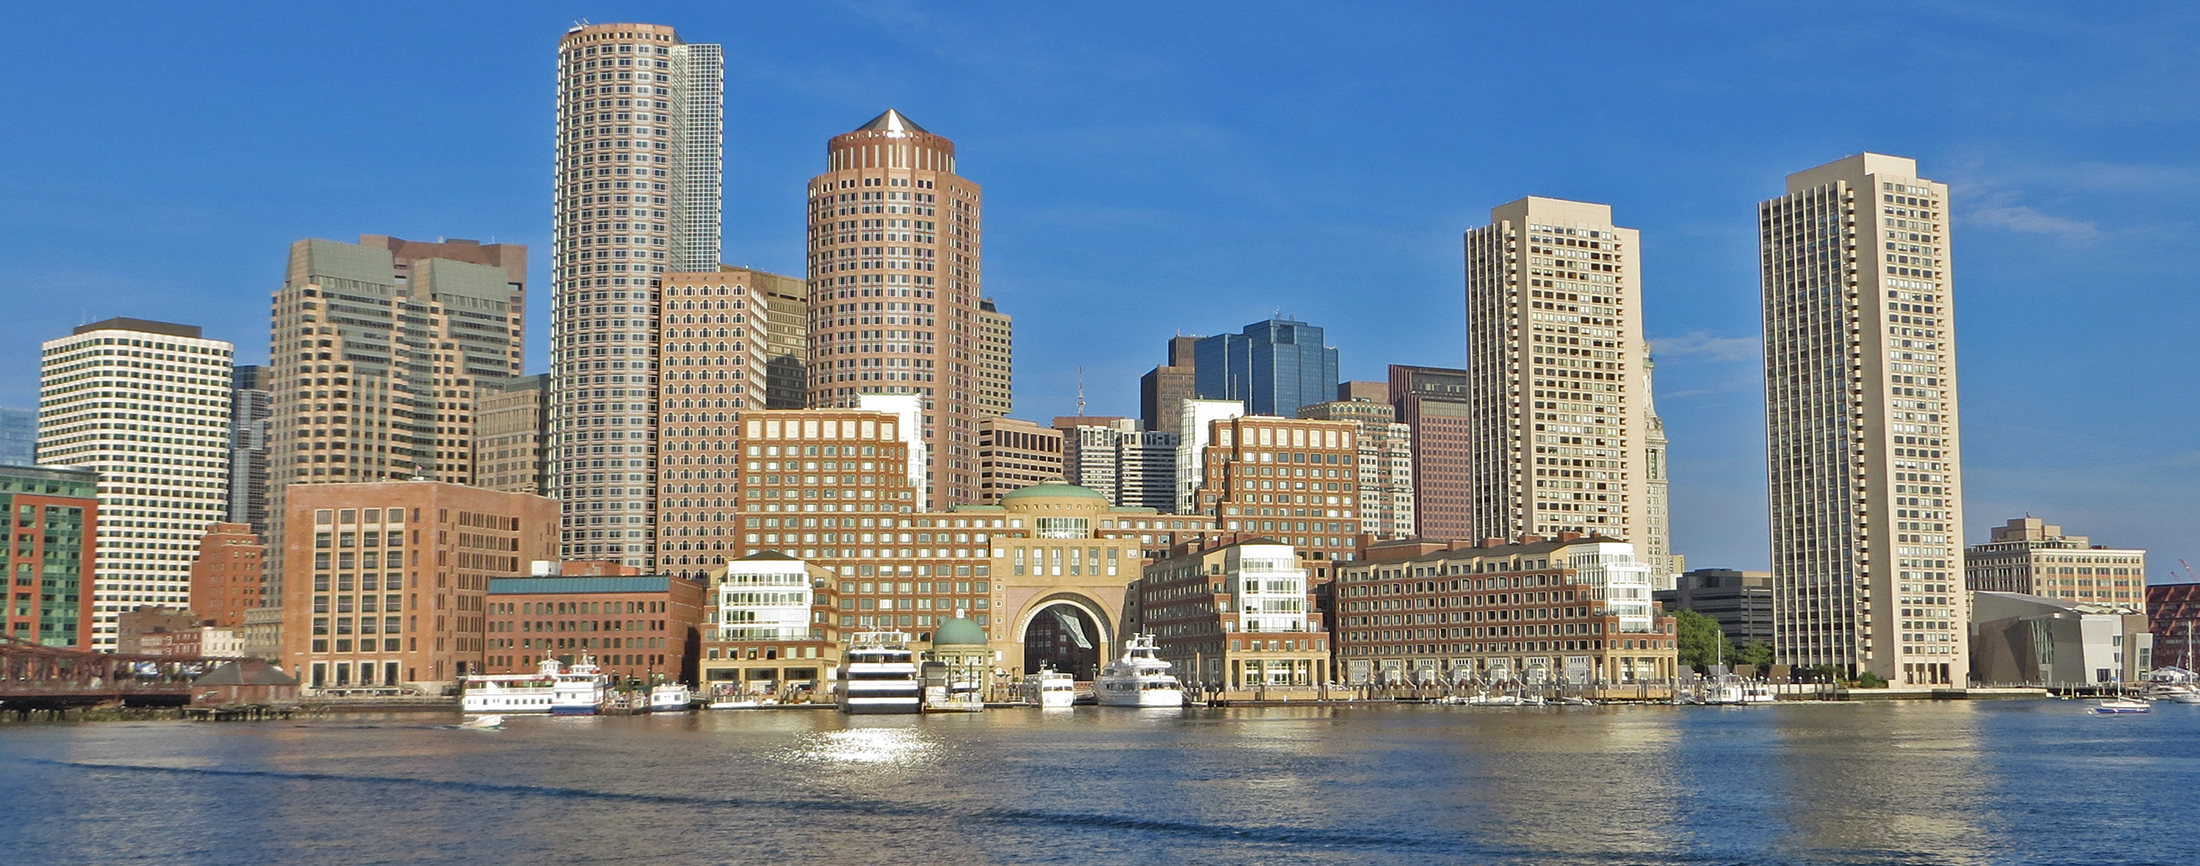 Boston Works to Accelerate Climate Action